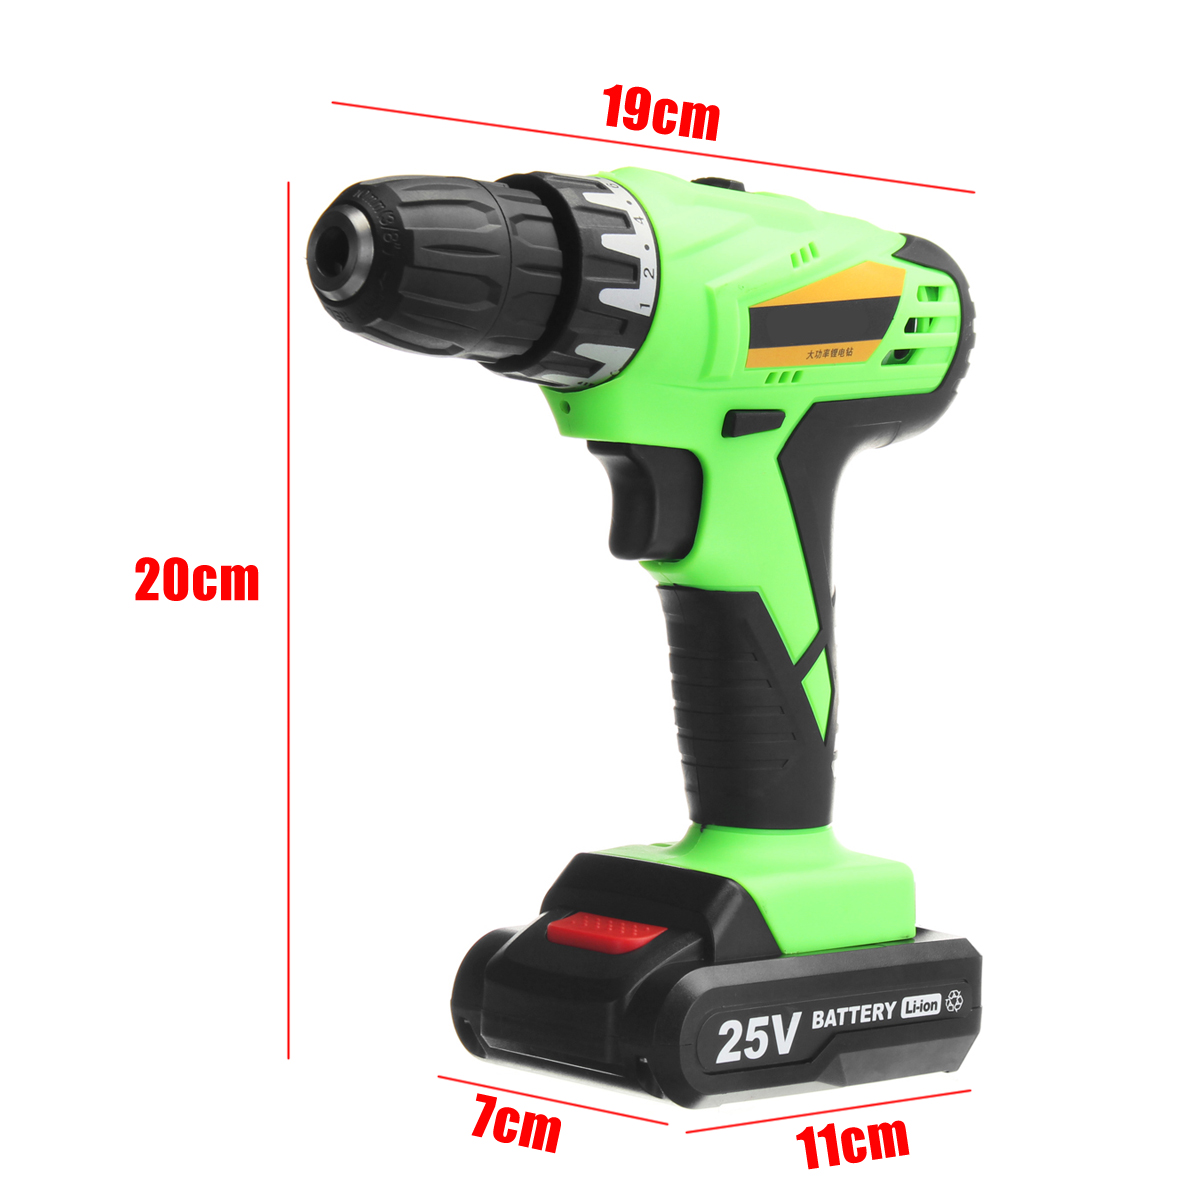 25V-Cordless-Power-Drill-2-Lithium-Ion-Battery-Rechargeable-Electric-Screwdriver-Kit-1275028-10